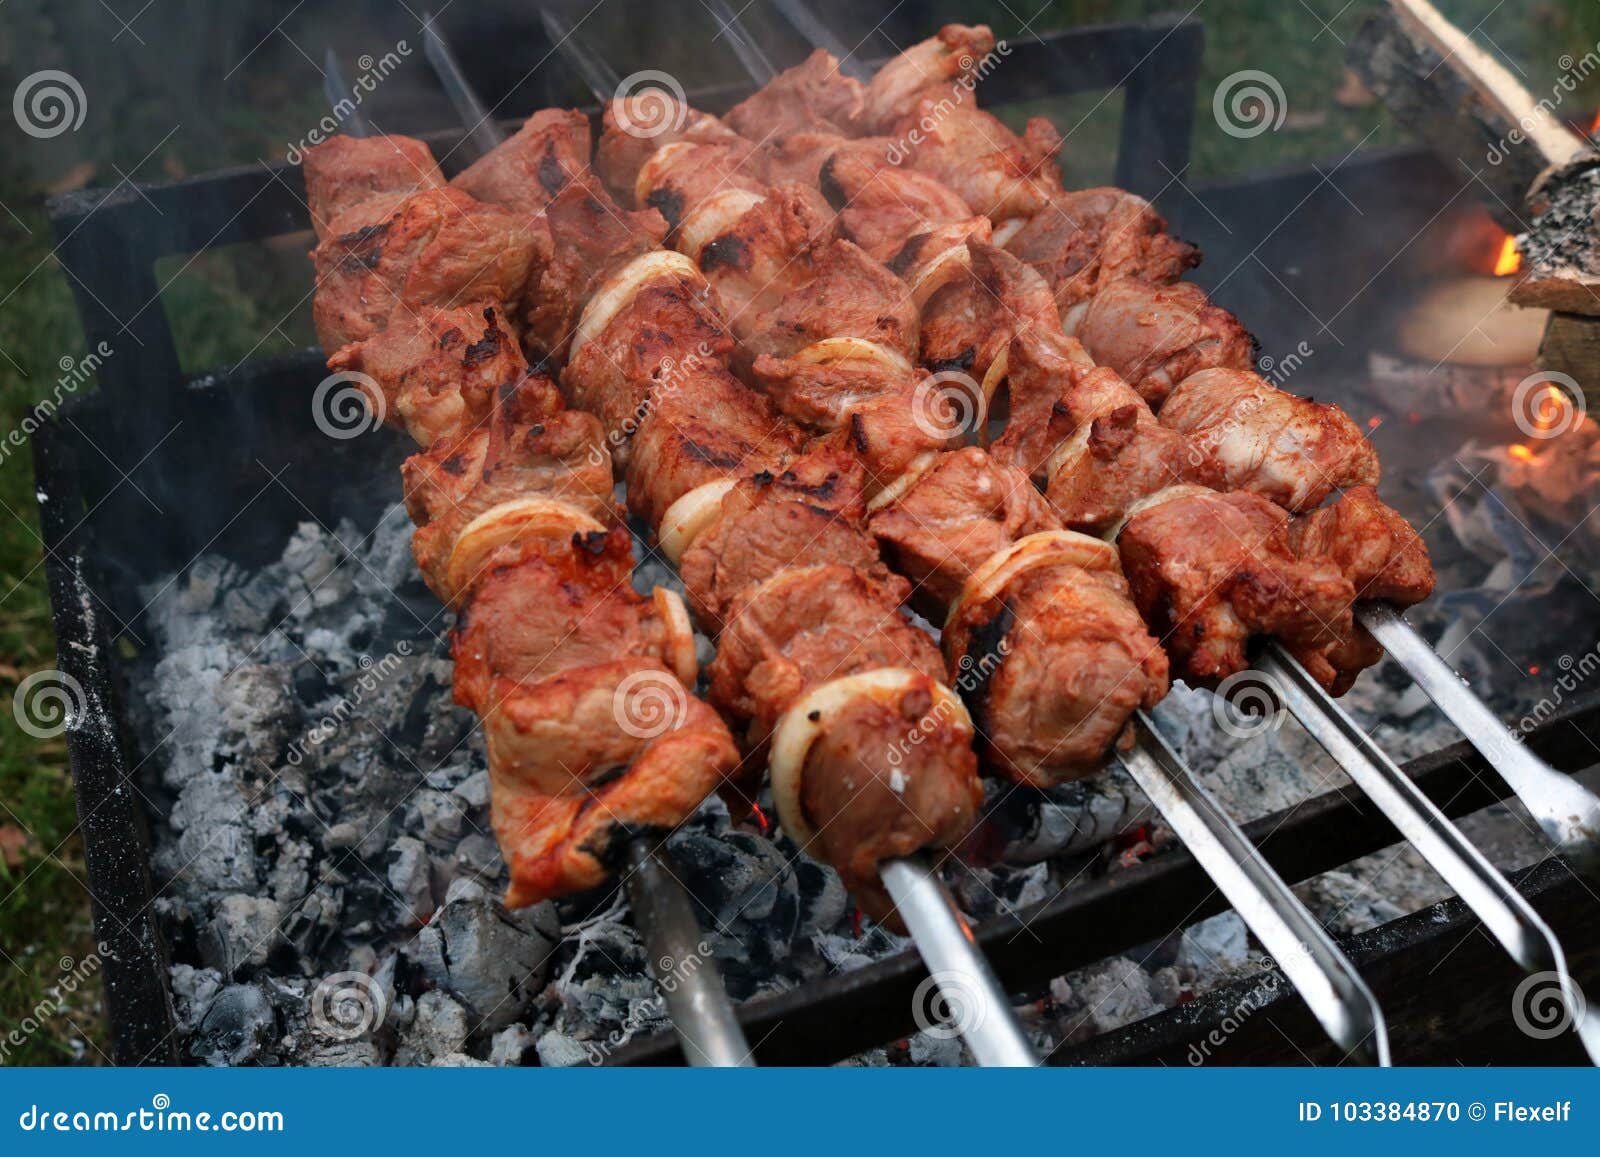 Grill Meat Barbeque on Fire. Stock Photo - Image of kebab, grill: 103384870